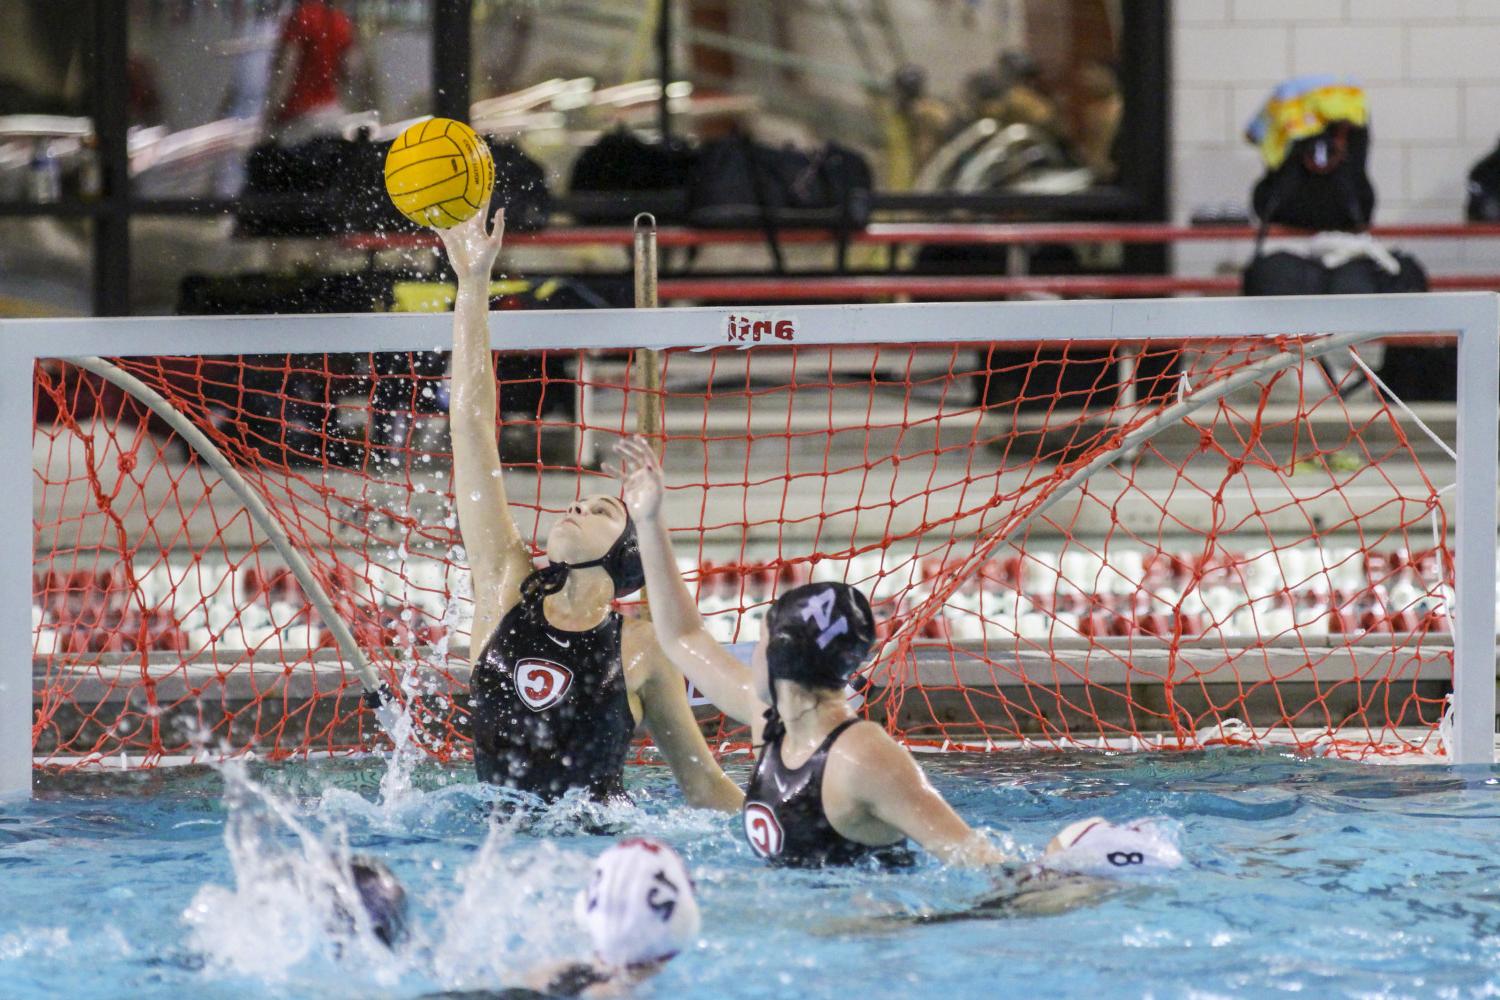 <a href='http://b412q.666777777.com'>博彩网址大全</a> student athletes compete in a water polo tournament on campus.